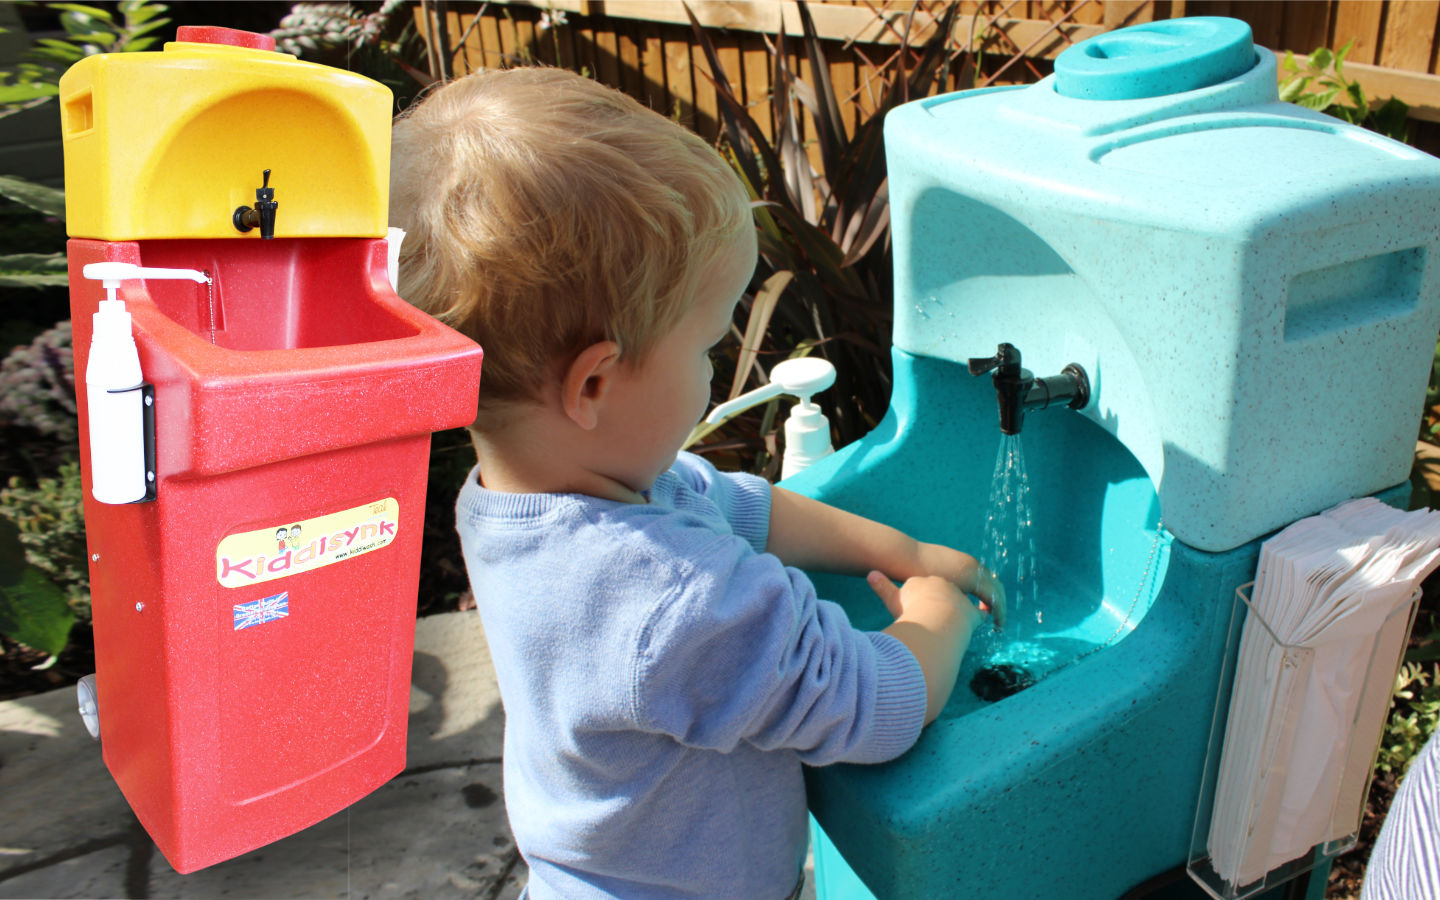 Younger children can learn to wash hands with the KiddiSynk